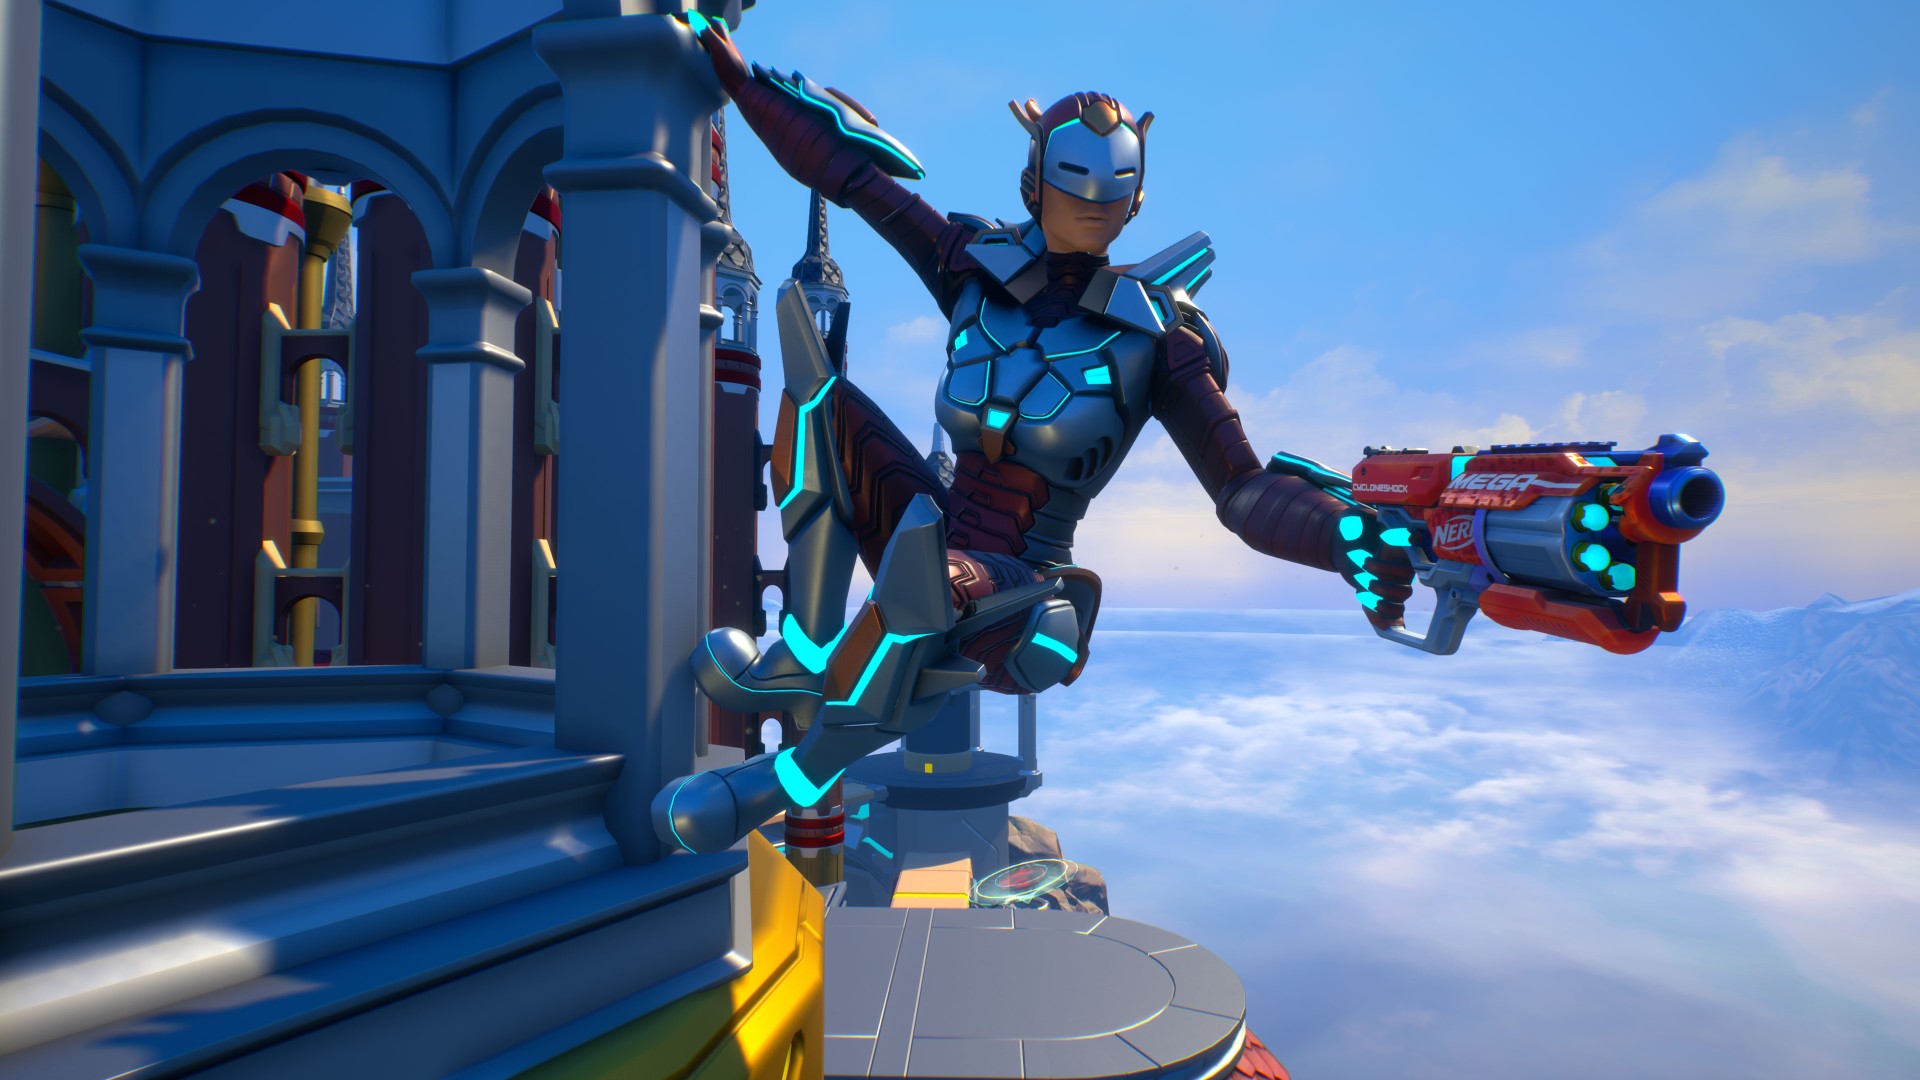 Enter the Nerf Trials to Become a Nerf Legend Today on Xbox One and Xbox Series X|S